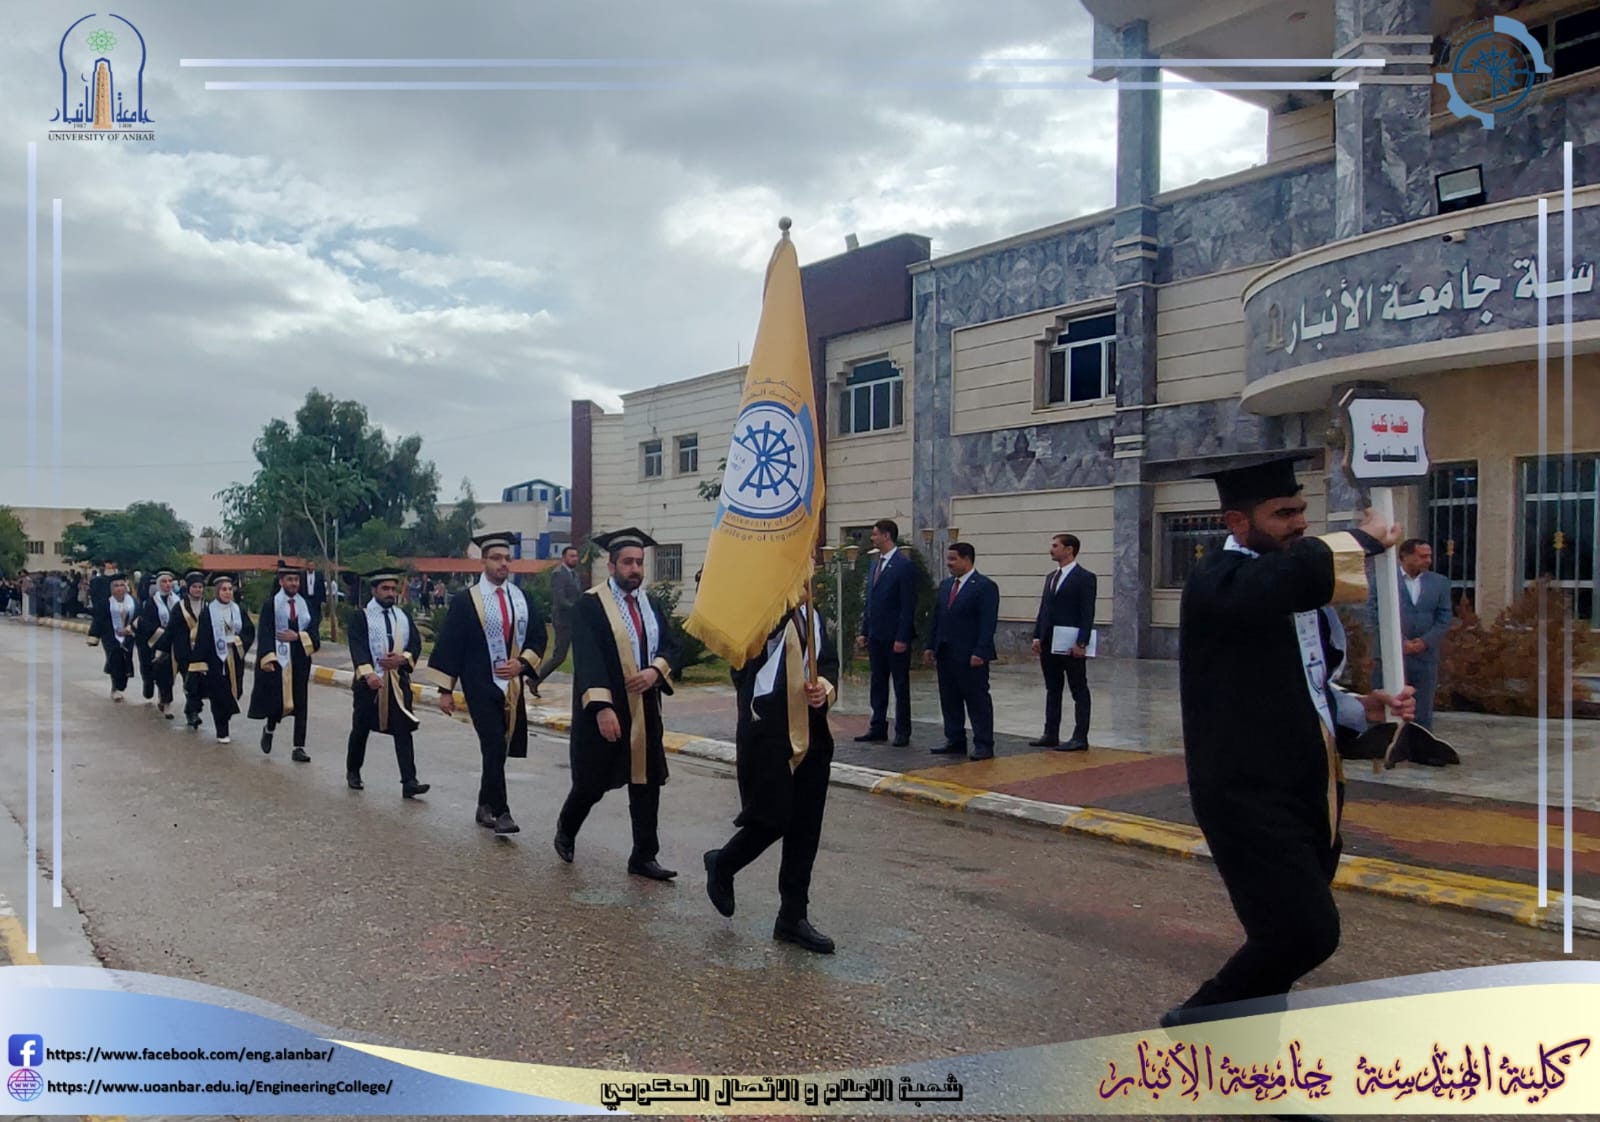  Participation of the College of Engineering - Anbar University in the central graduation ceremony of the 33rd session of the Al-Aqsa Flood, which was held by Anbar University.